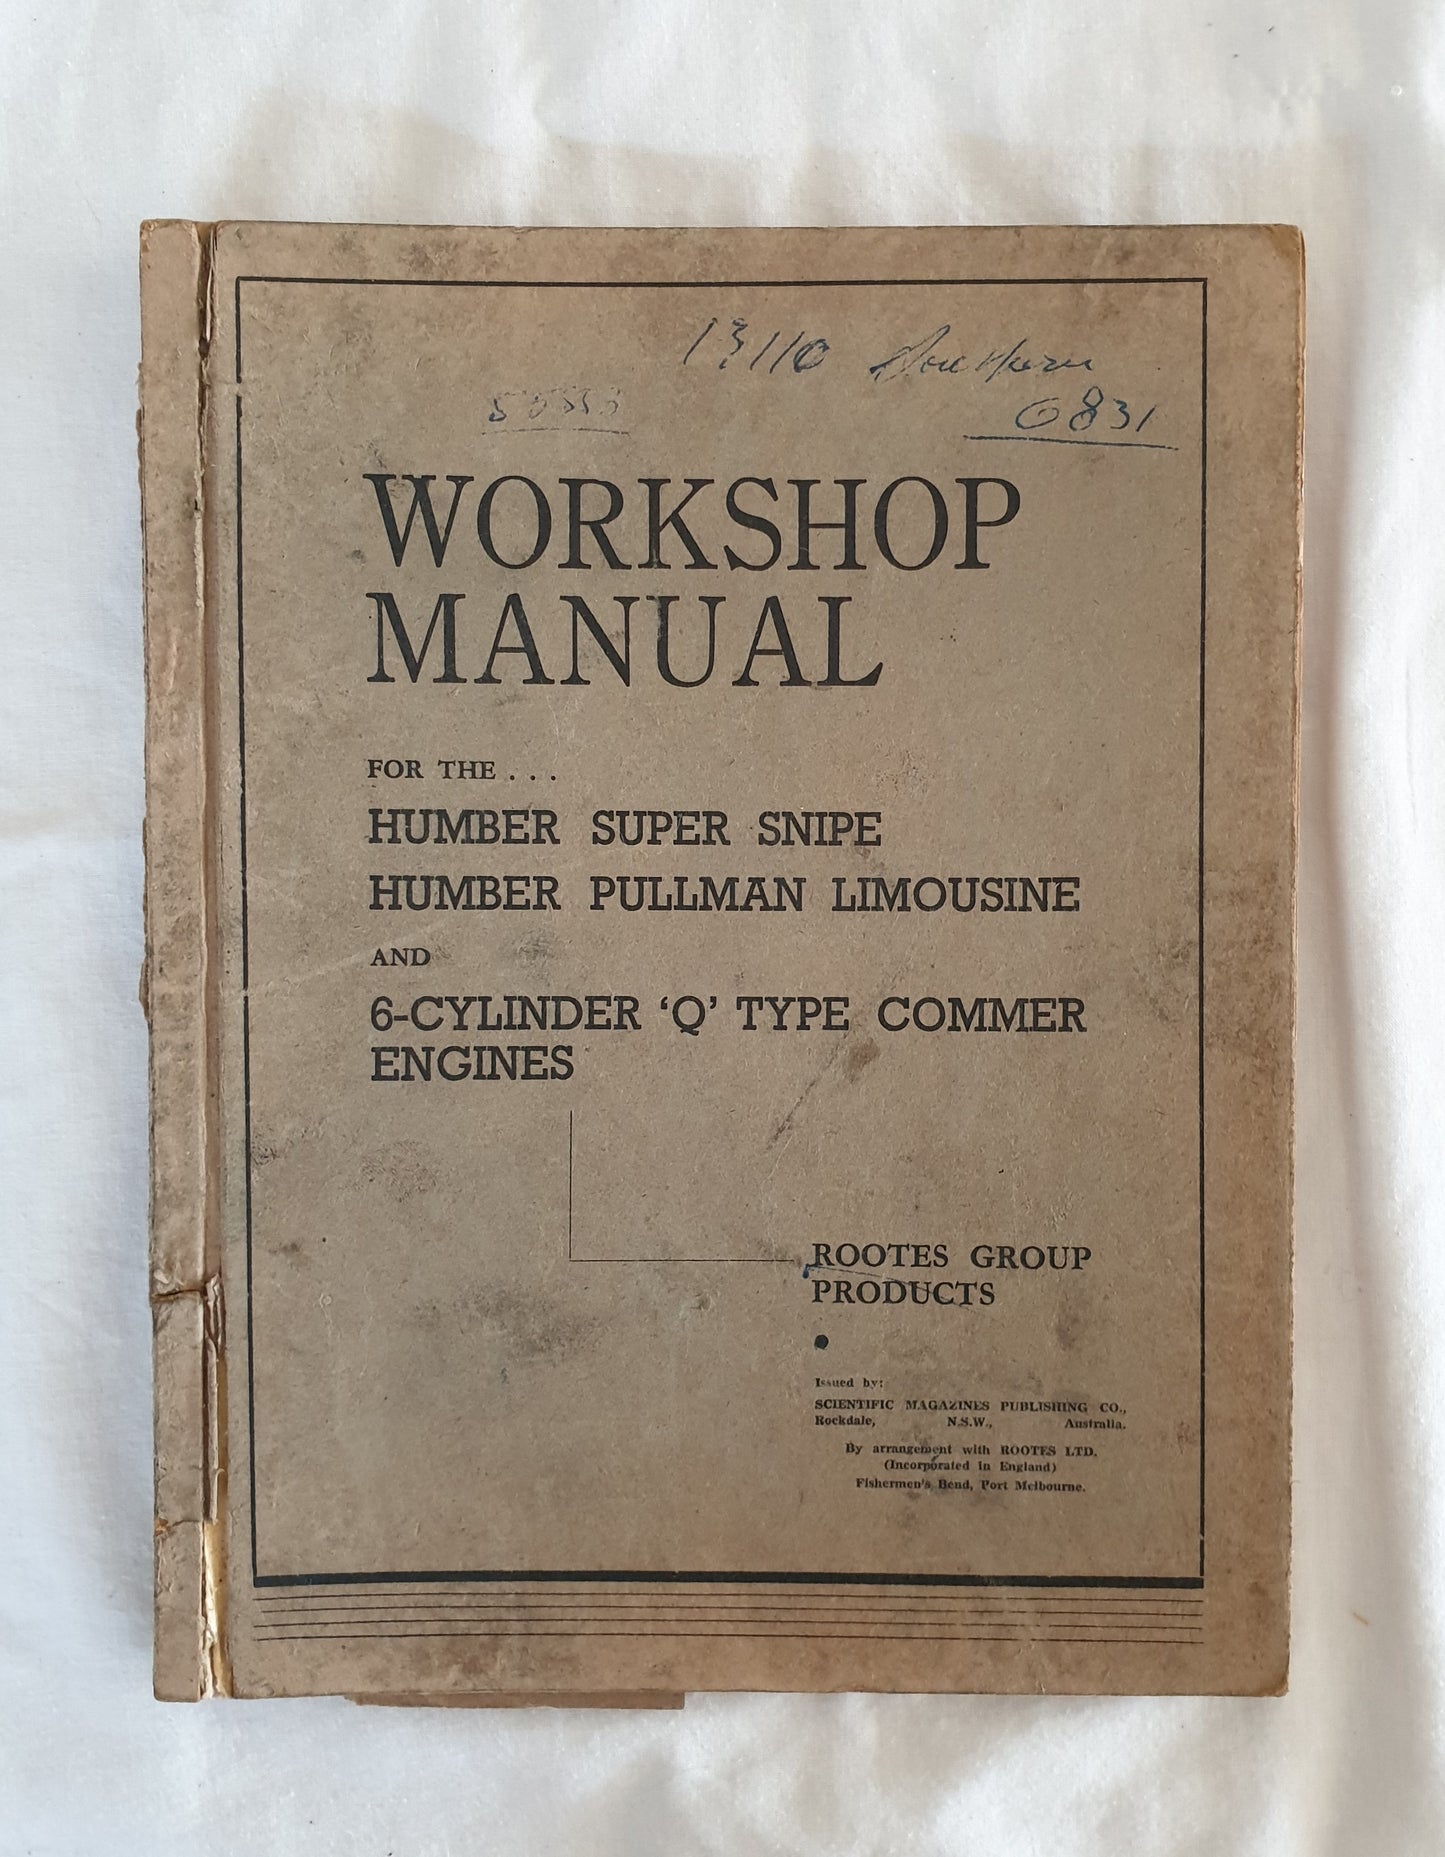 Workshop Manual for the Humber Super Snipe Humber Pullman Limousine and 6-Cylinder "Q" Type Commer Engines